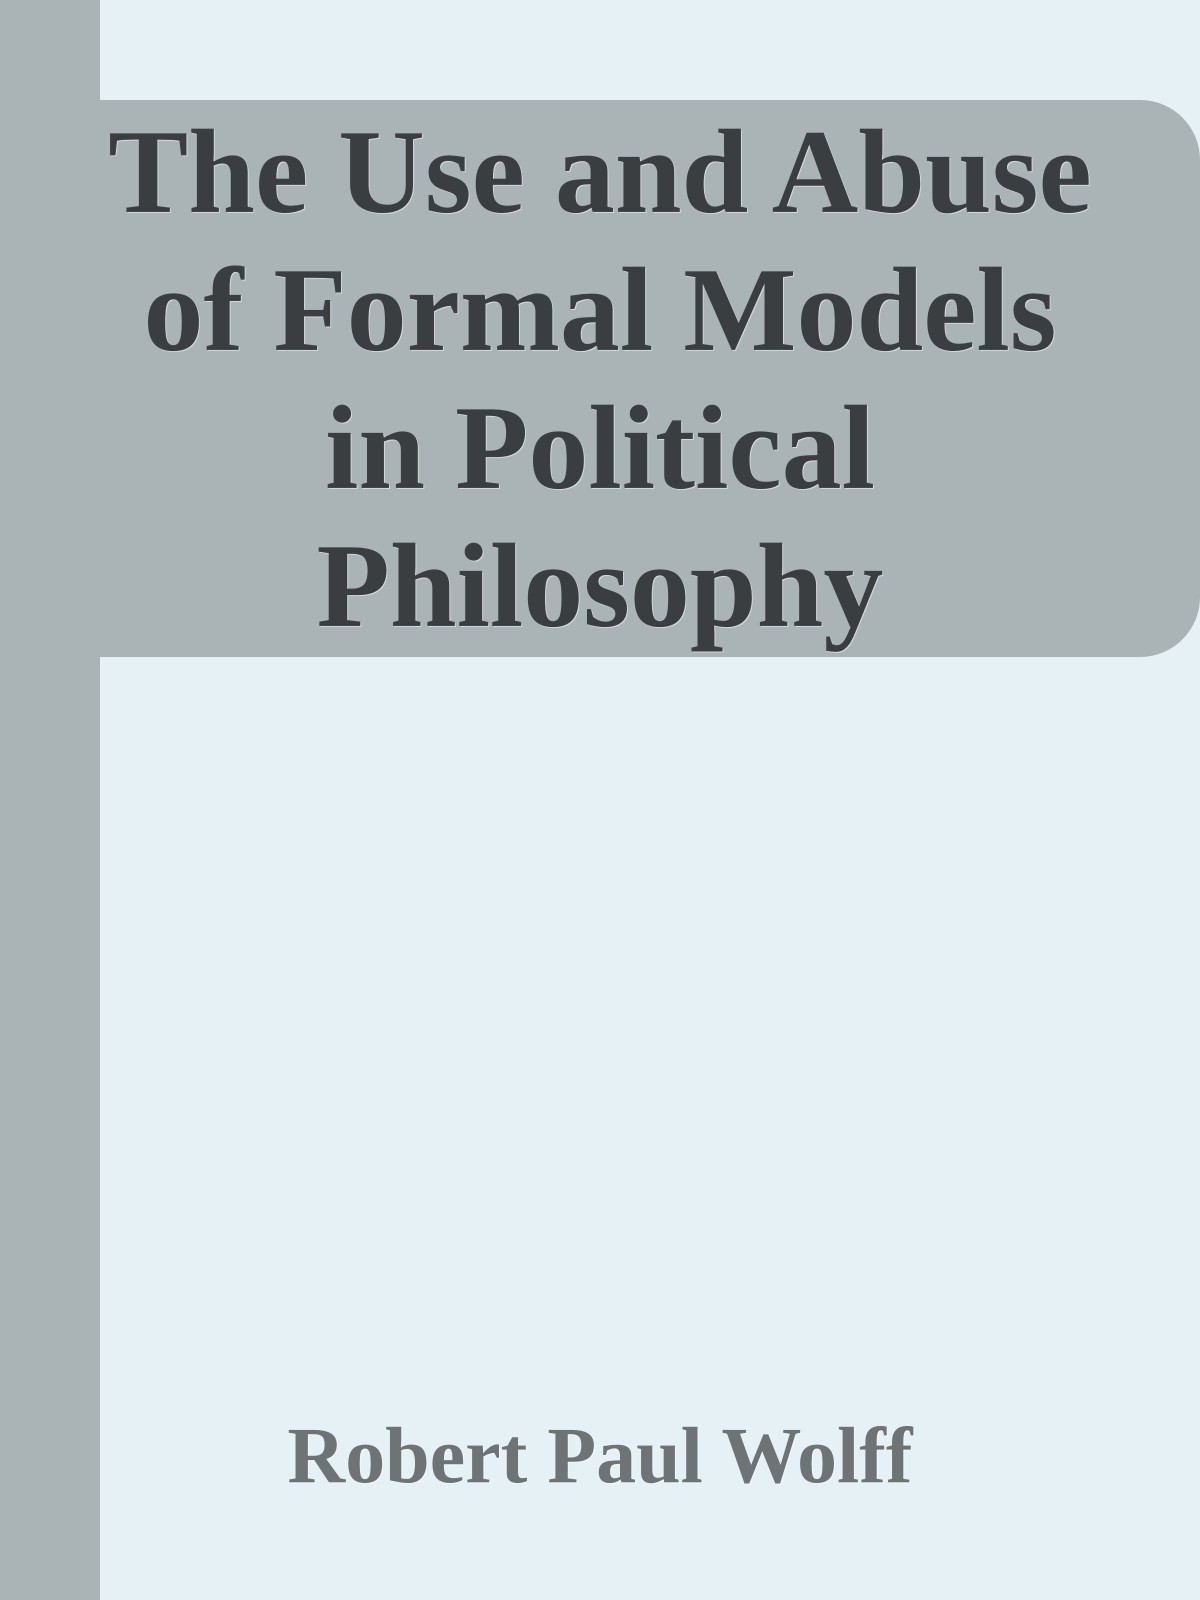 The Use and Abuse of Formal Models in Political Philosophy